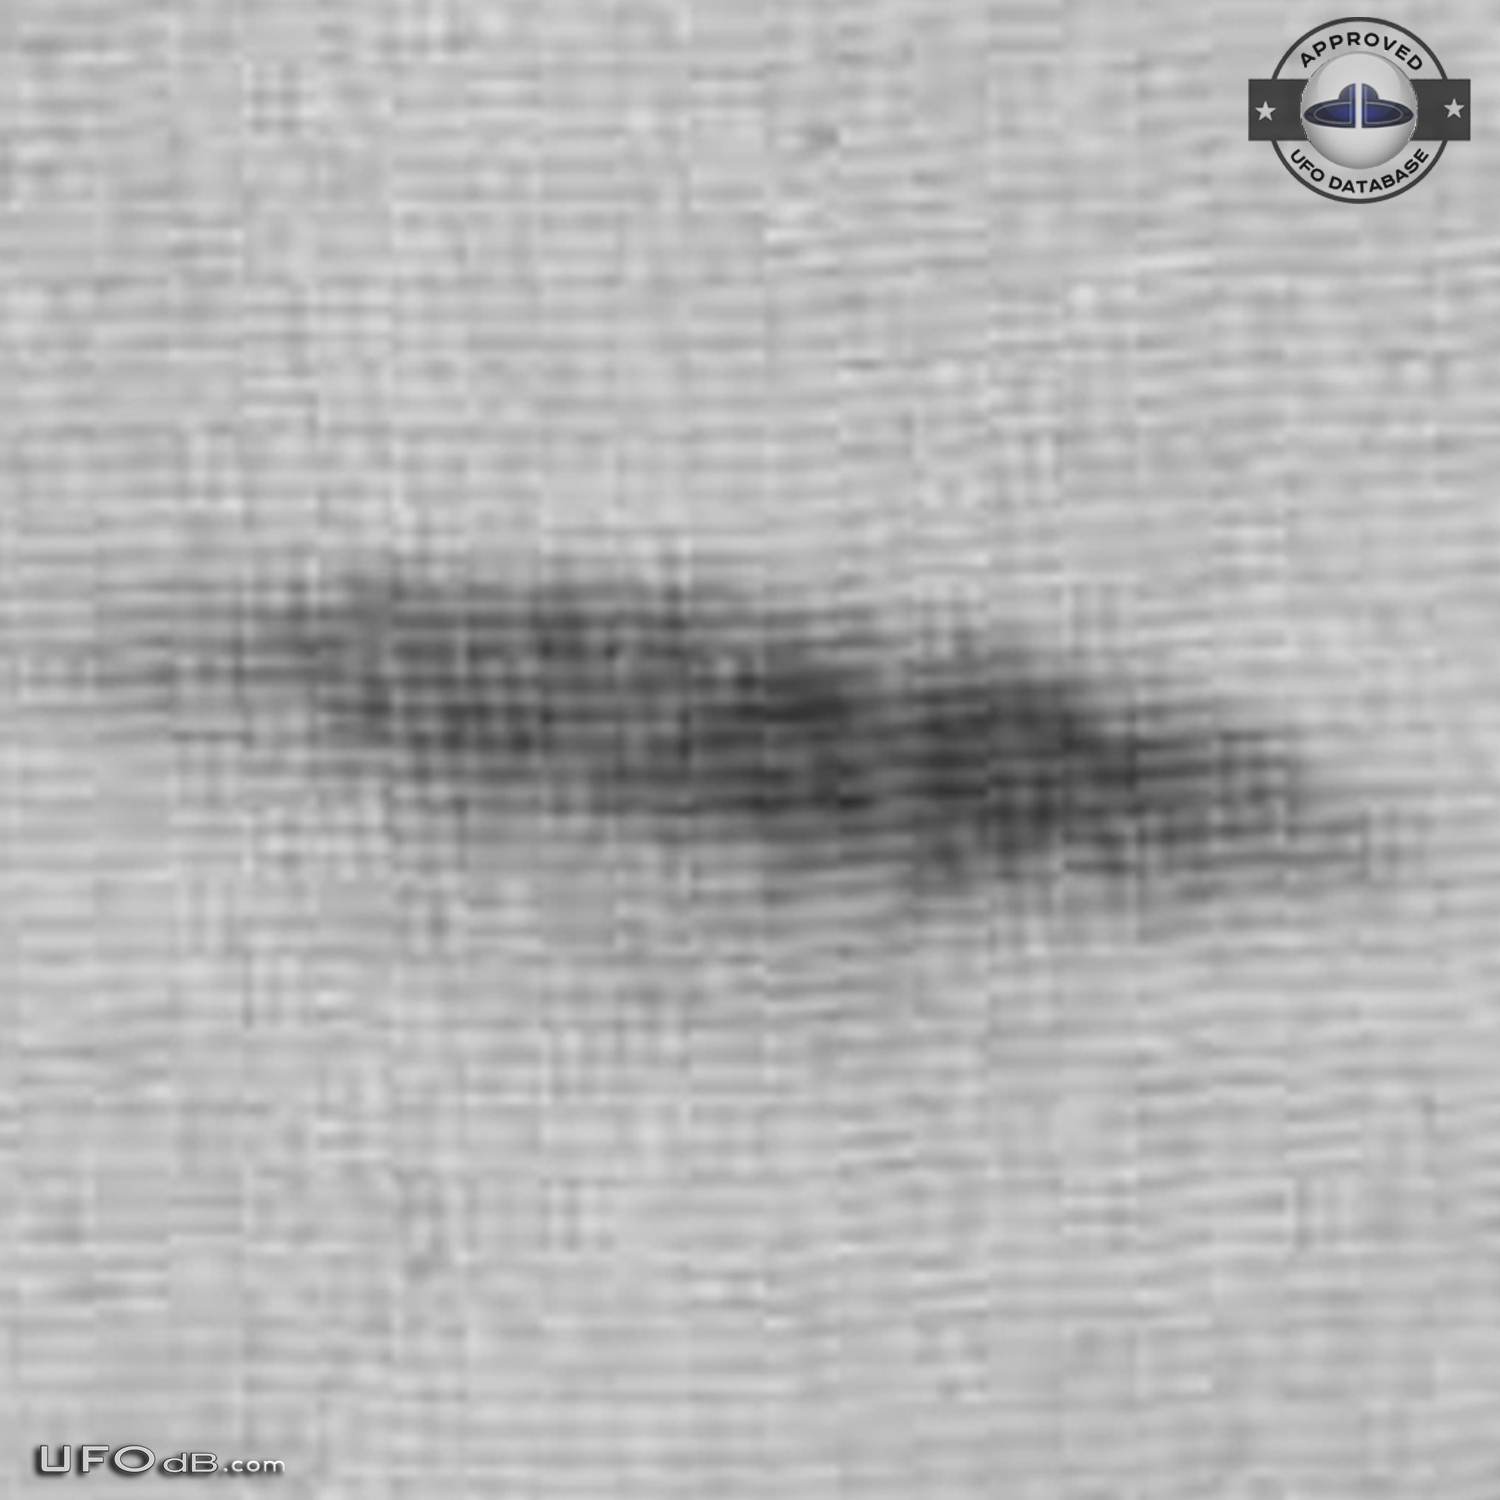 Old 1962 UFO picture coming from Argentina showing Saucer over hill UFO Picture #518-3